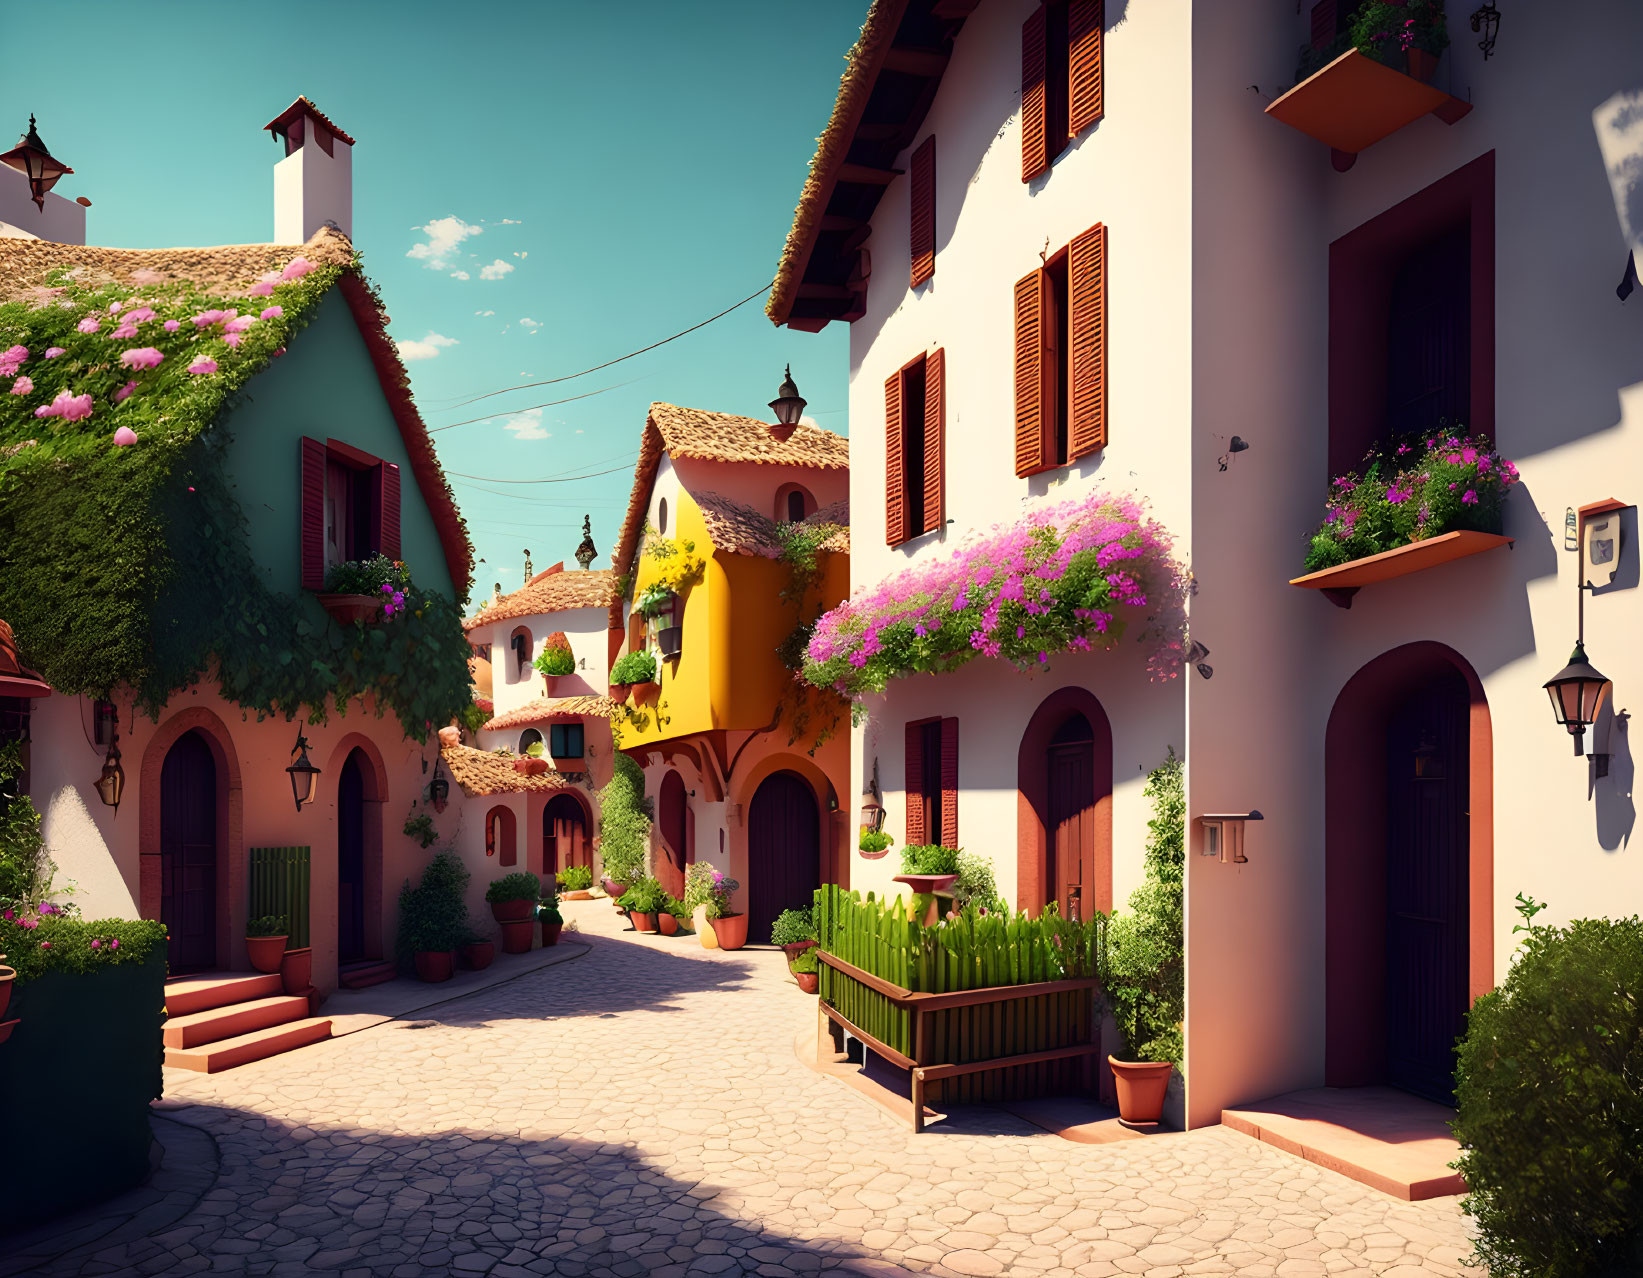 Colorful Village Street with Vibrant Flowers and Blue Sky